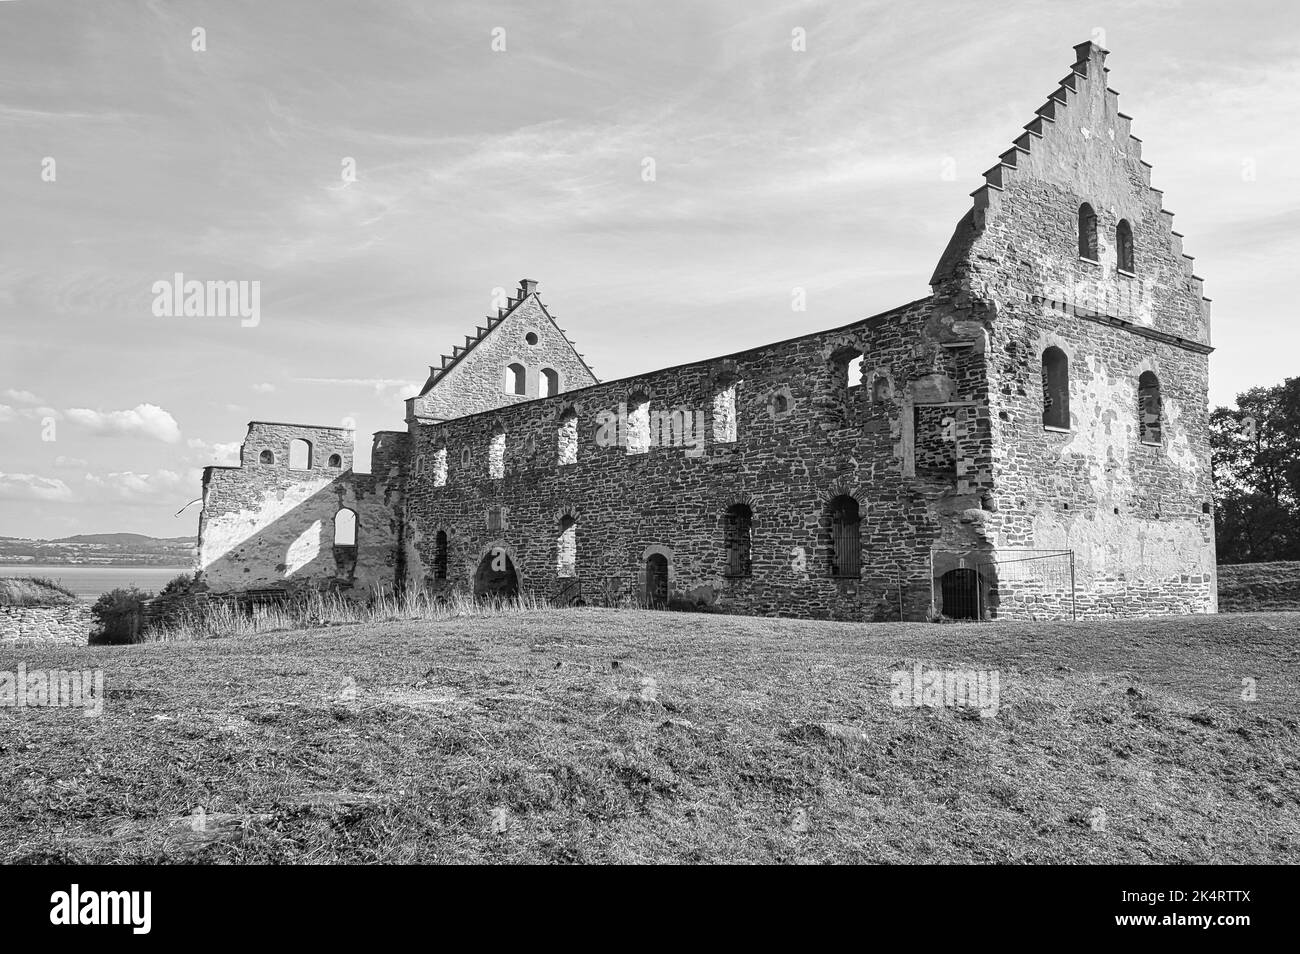 Visingsborg Castle in Sweden on the island of Visingsö in Lake Vätterm. Ruin from the Middle Ages from the Swedish king. Landscape photo Stock Photo